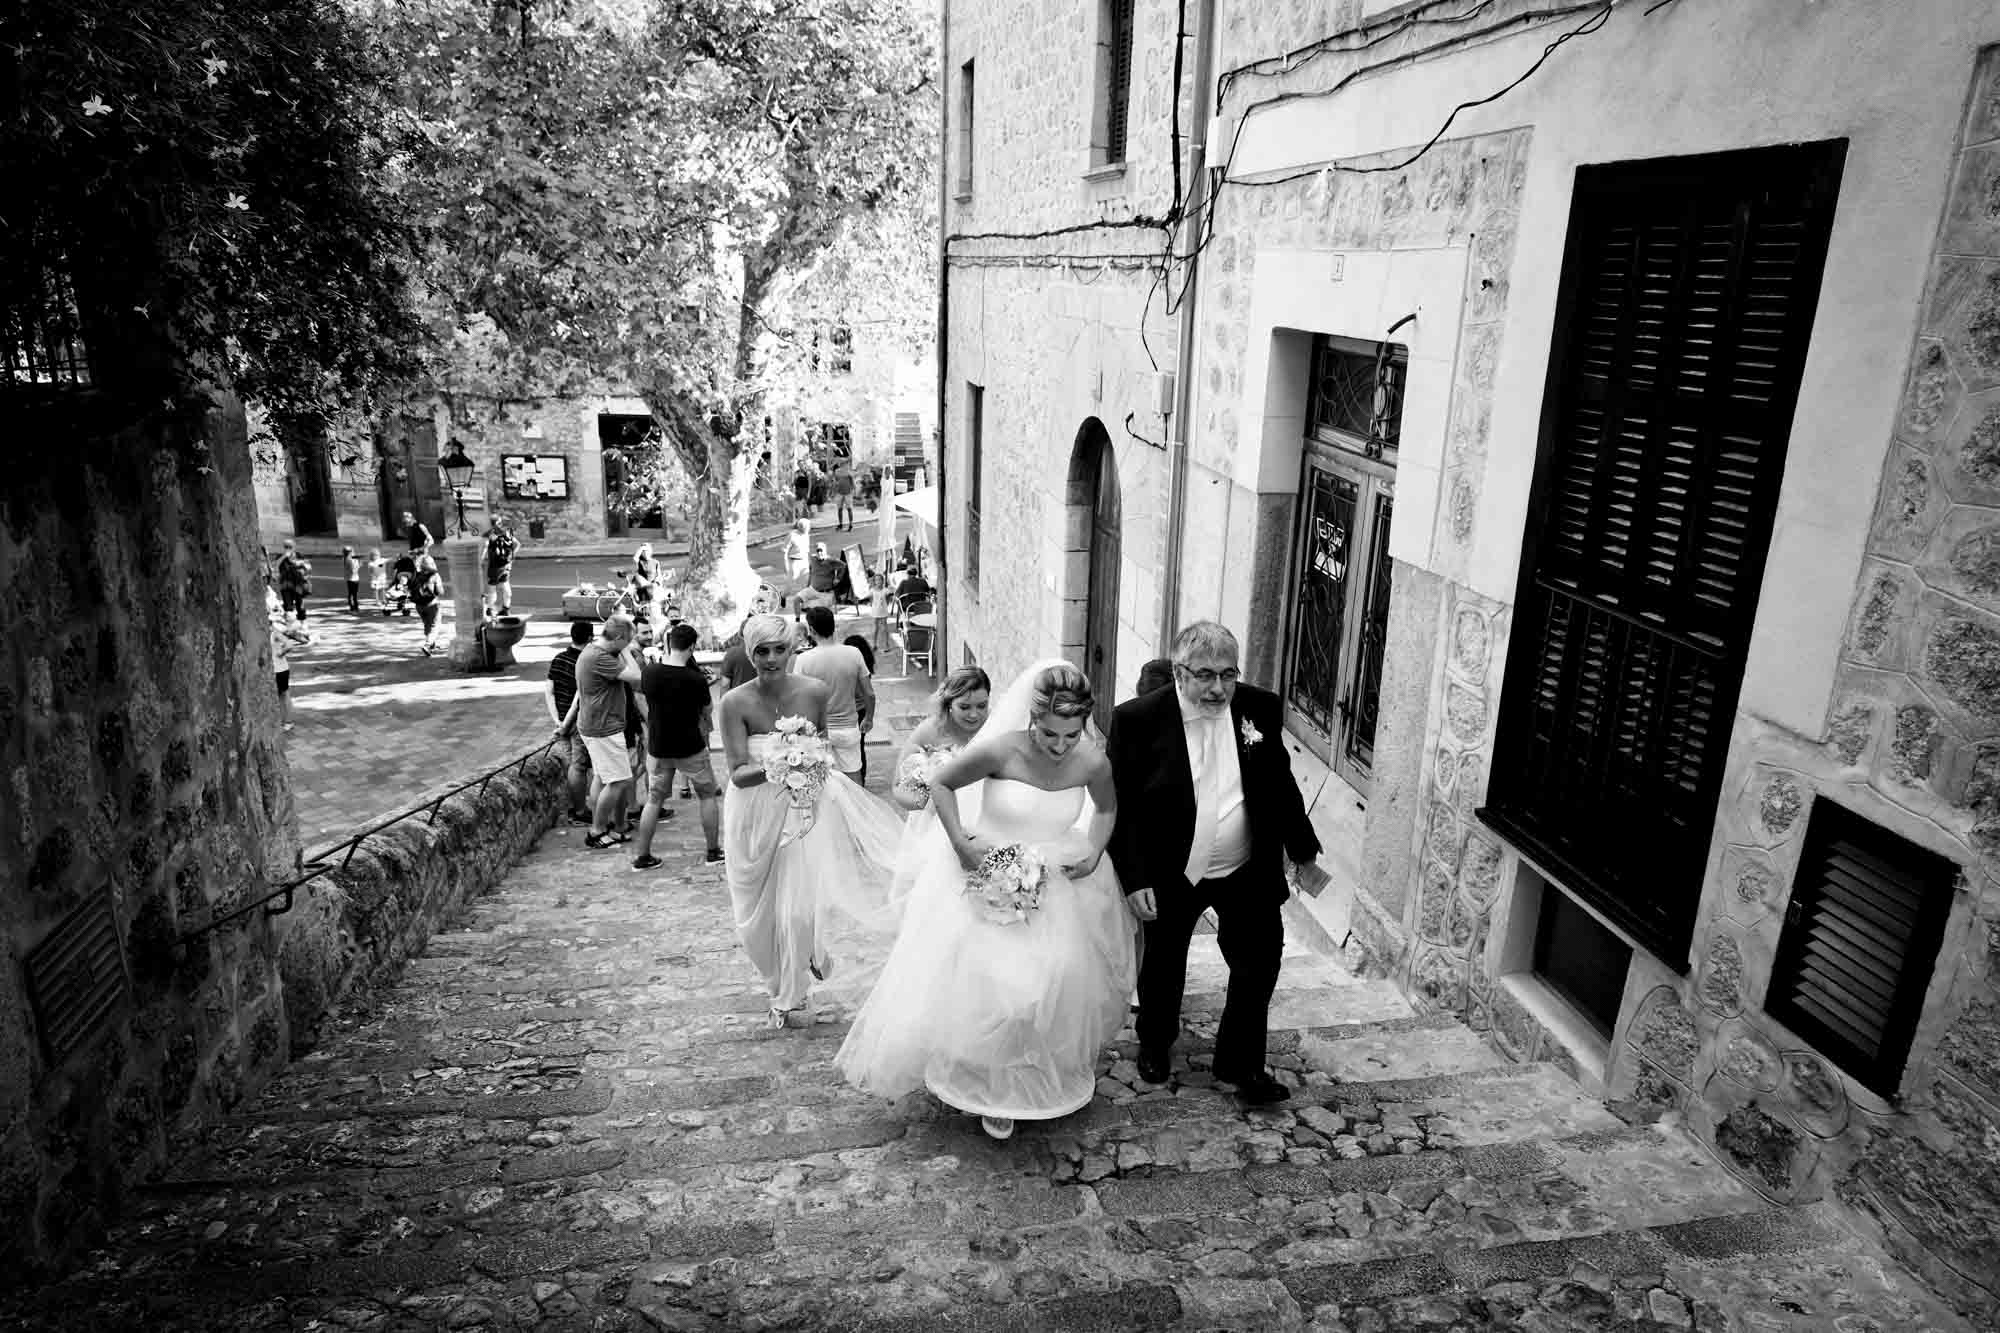 The bridal party walk up the steps to the church in Fornalutx